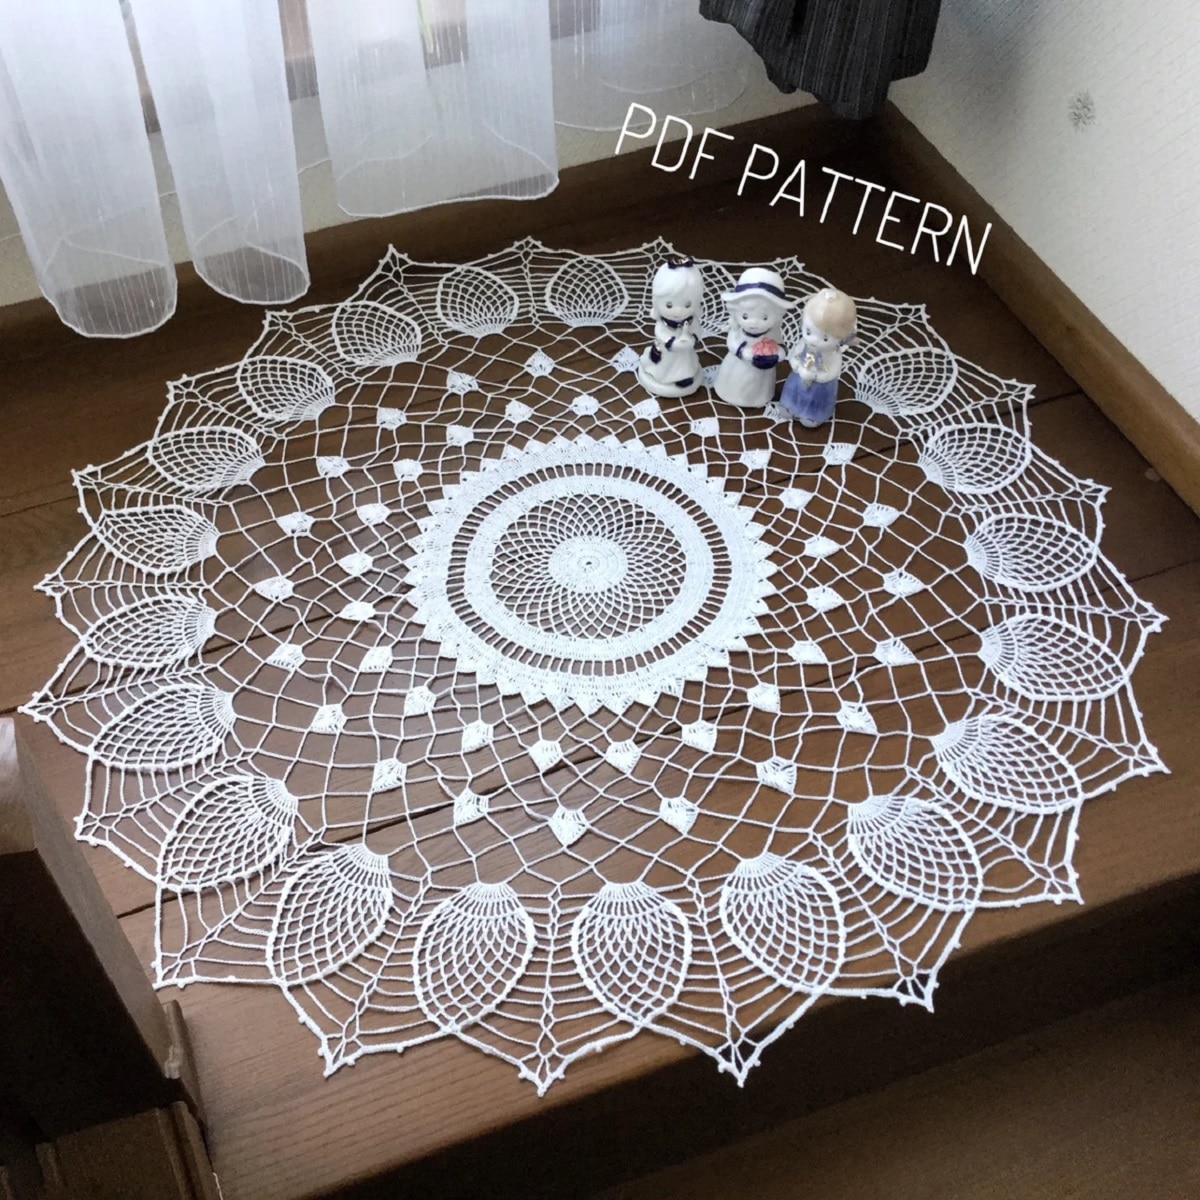 Large round cream crochet doily with five circles in the center, small white pineapples in circles spreading out to large pineapples in petals along the edges.